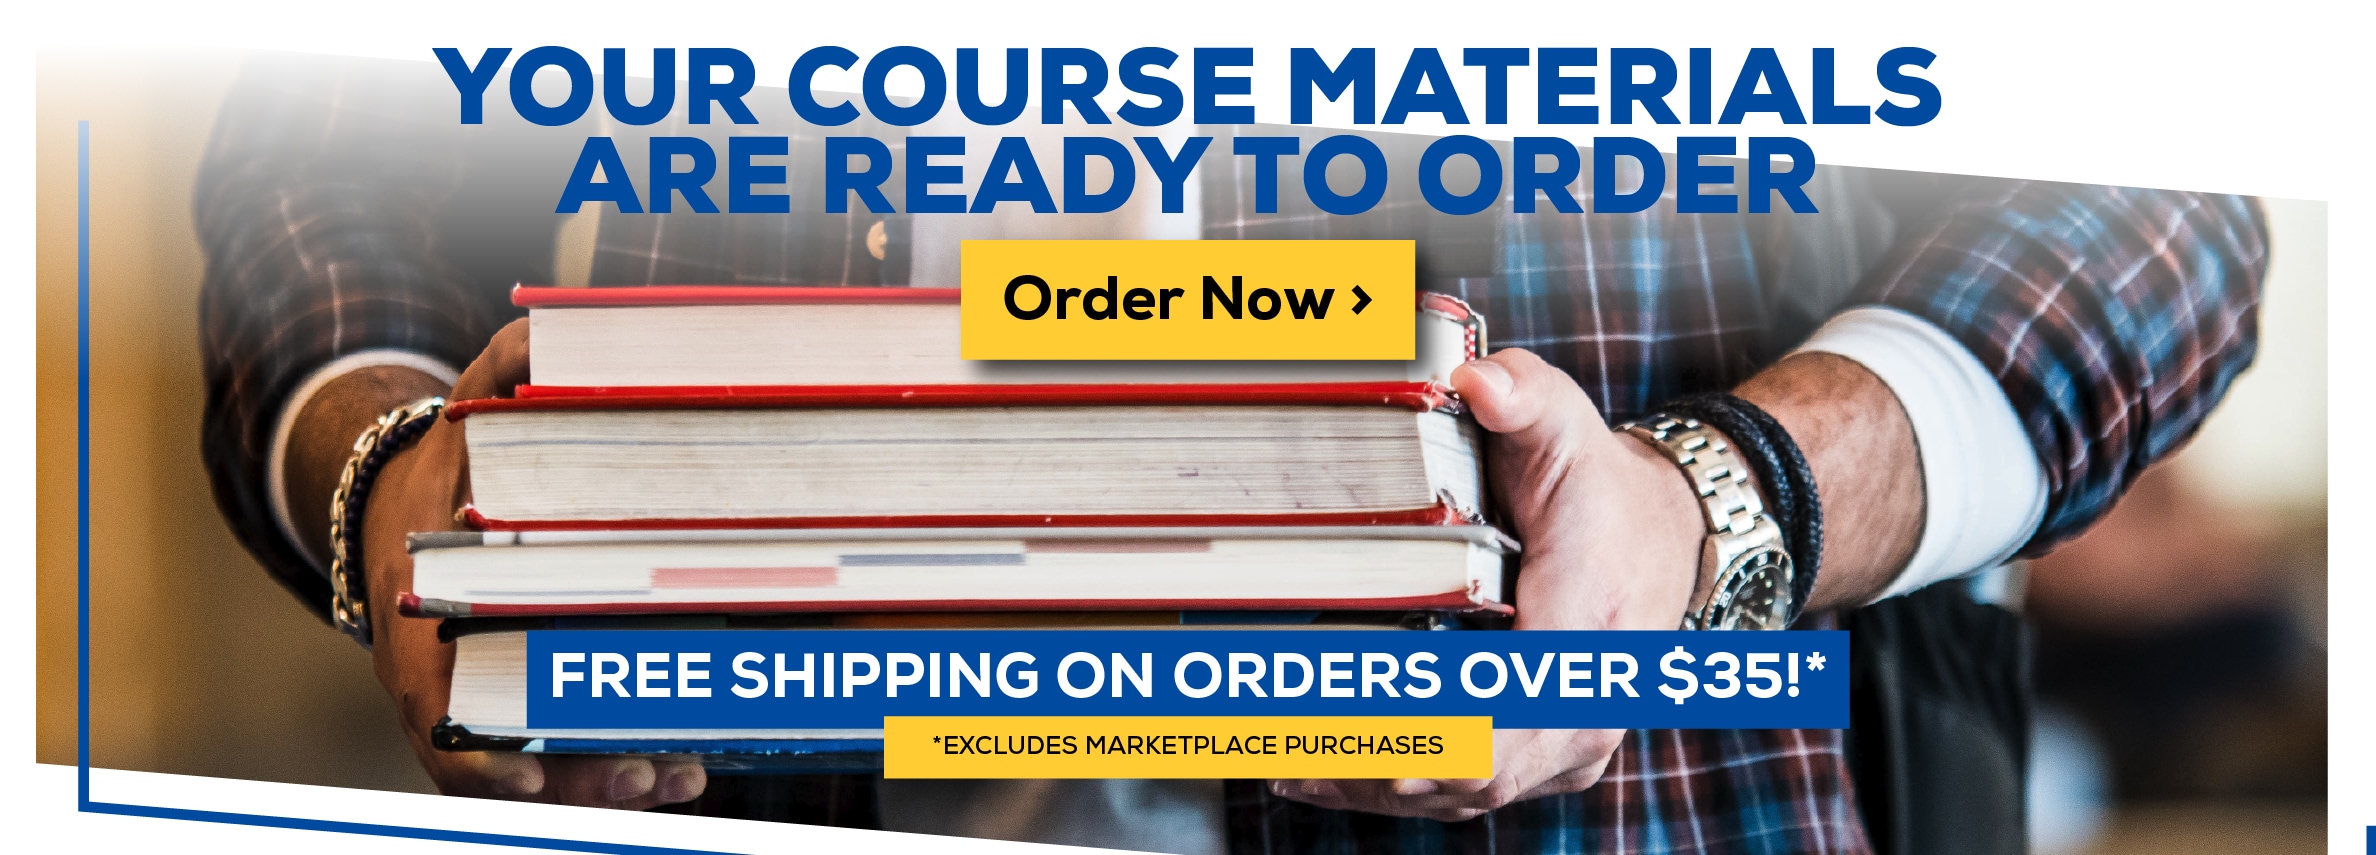 Your Course Materials are Ready to Order. Order Now. Free shipping on orders over $35! *Excludes marketplace purchases.